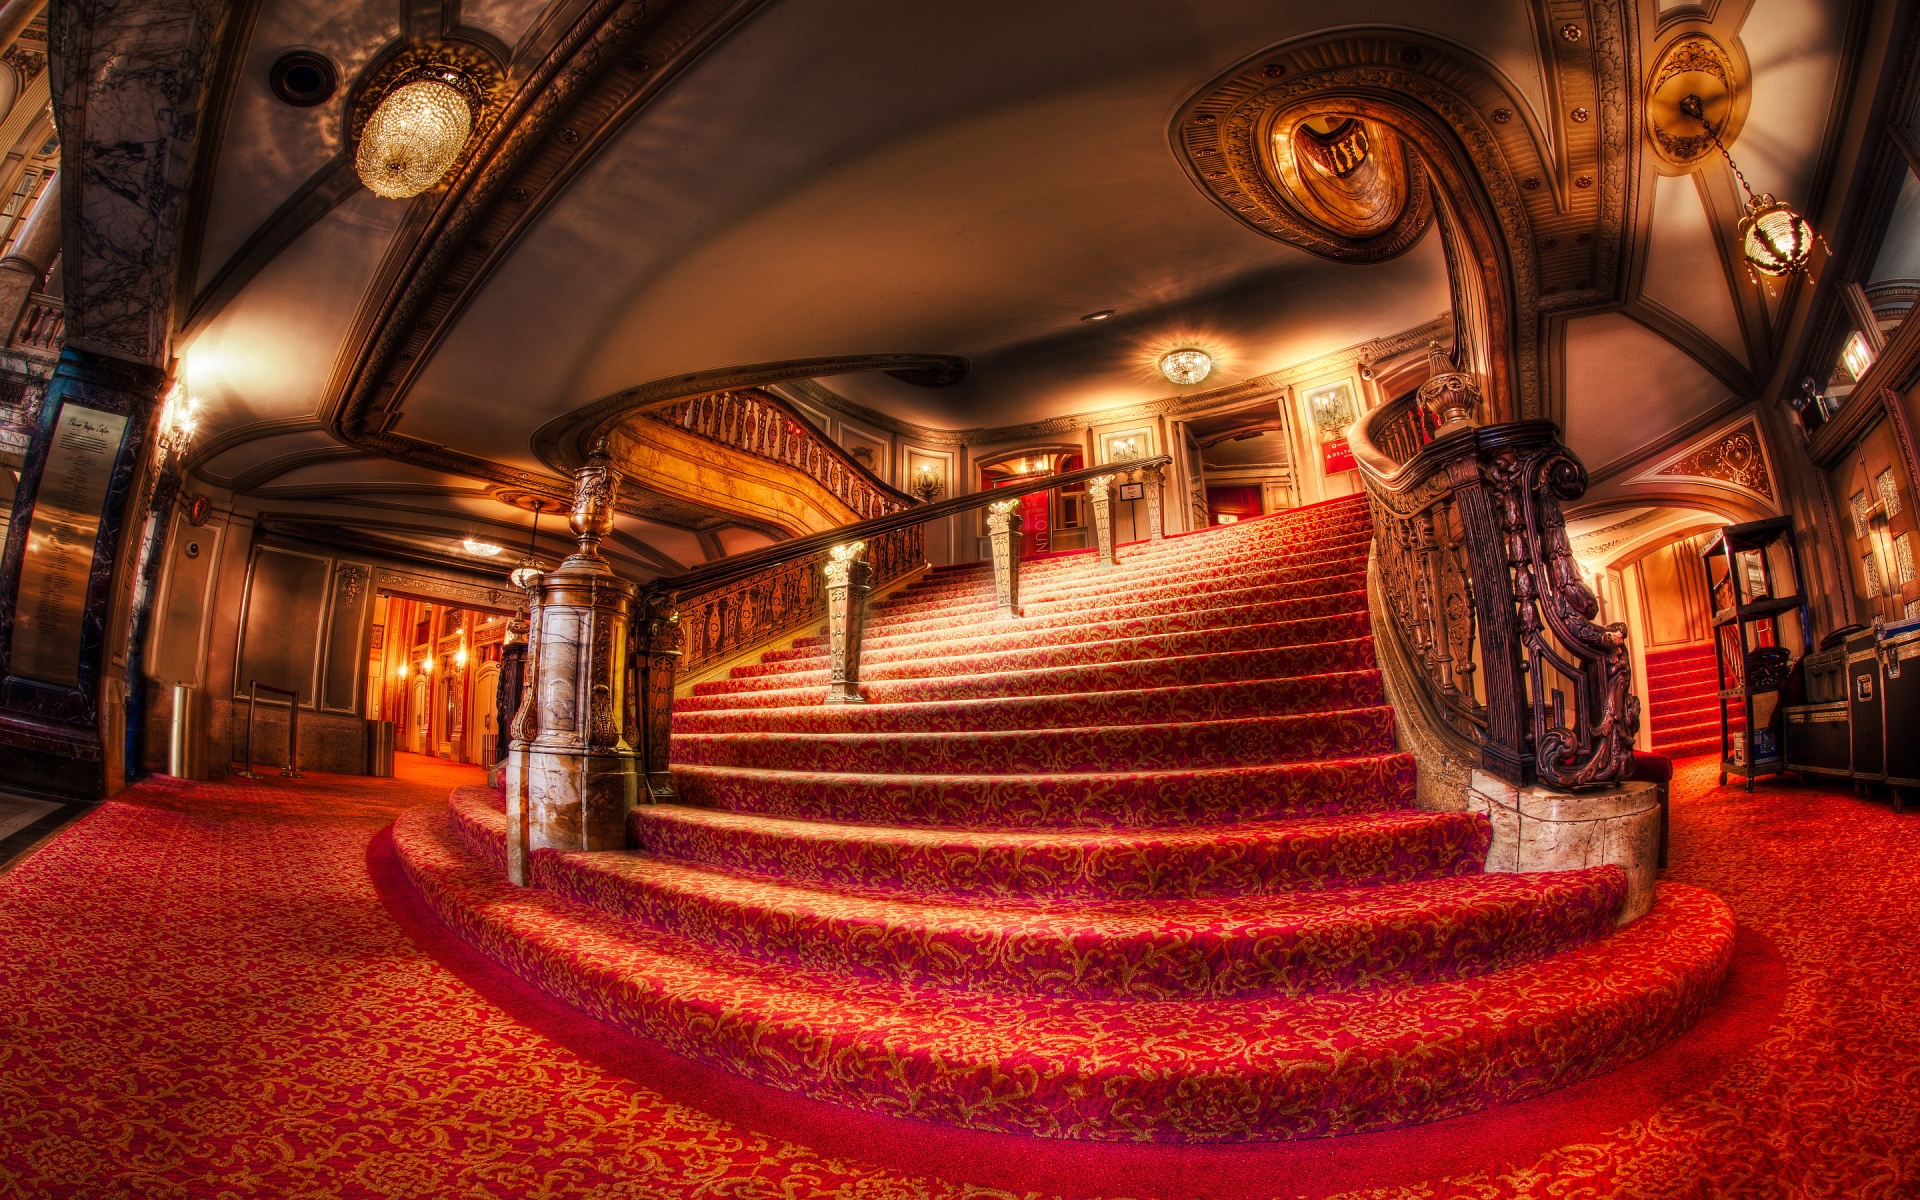 stairs, Chicago, Theater, Room, Hdr, Retro Wallpaper